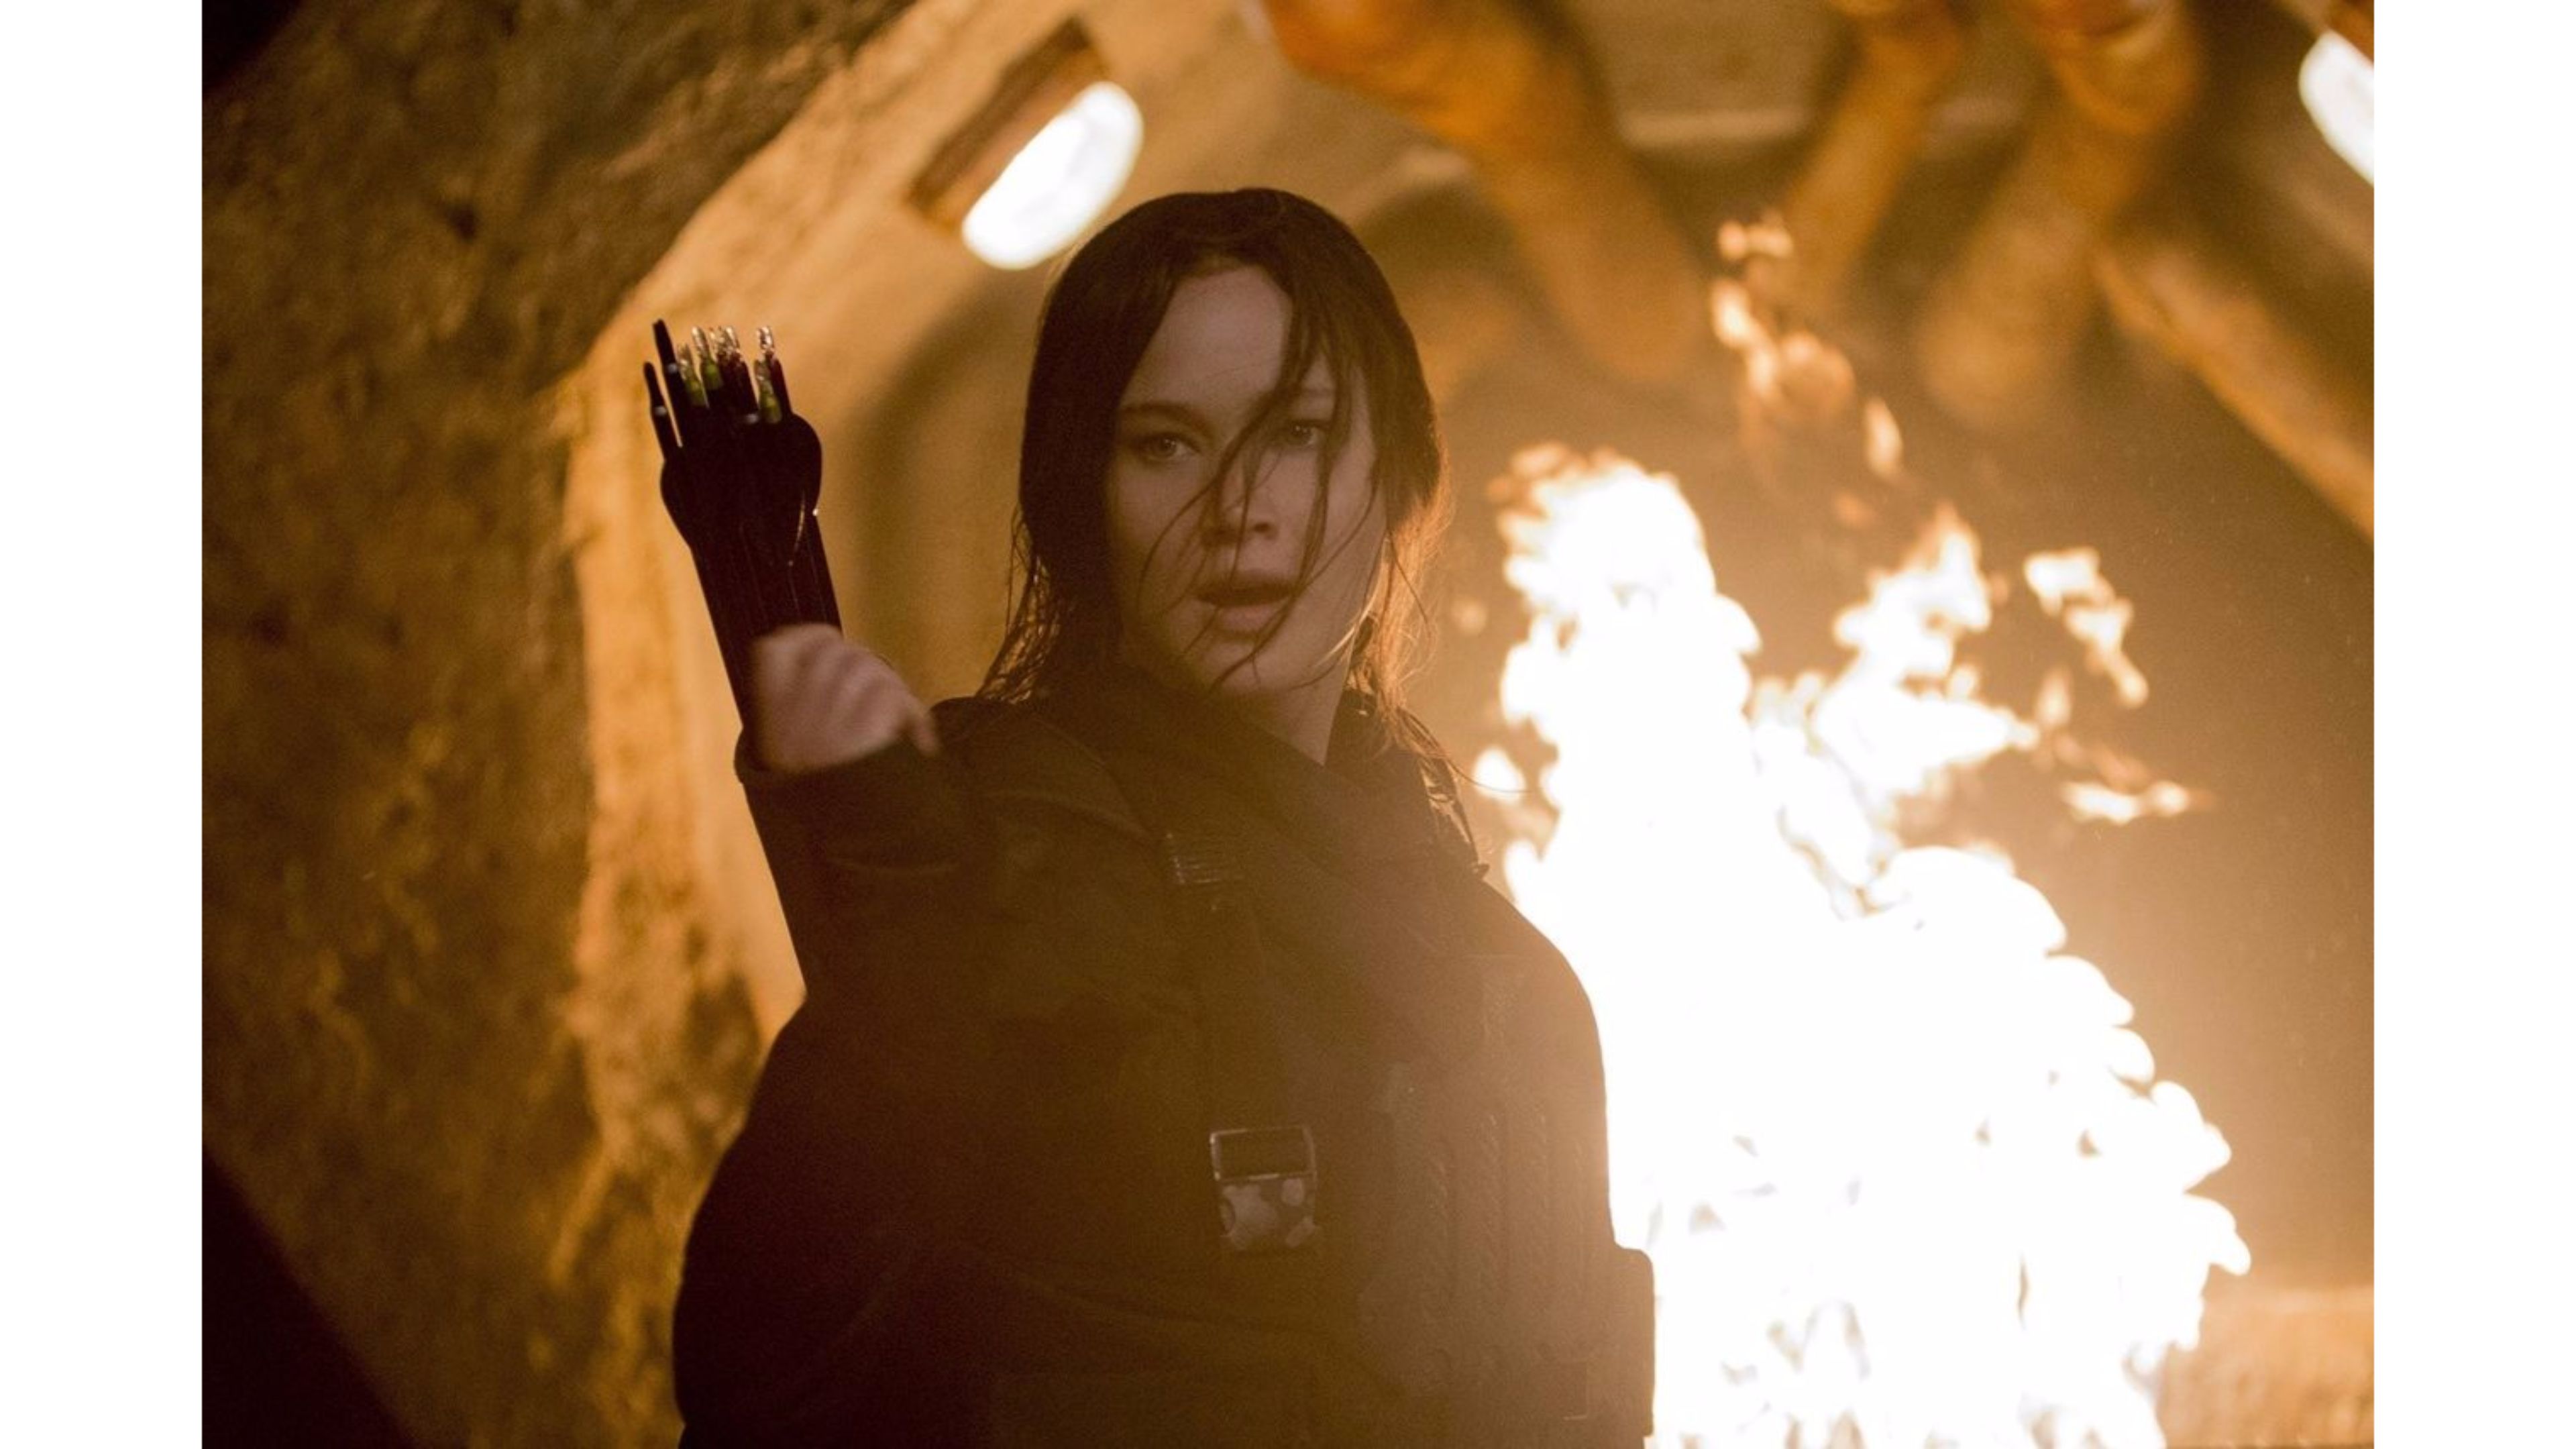 The Hunger Games Mockingjay Part 2 Wallpaper - Good Composition Movie Scenes - HD Wallpaper 